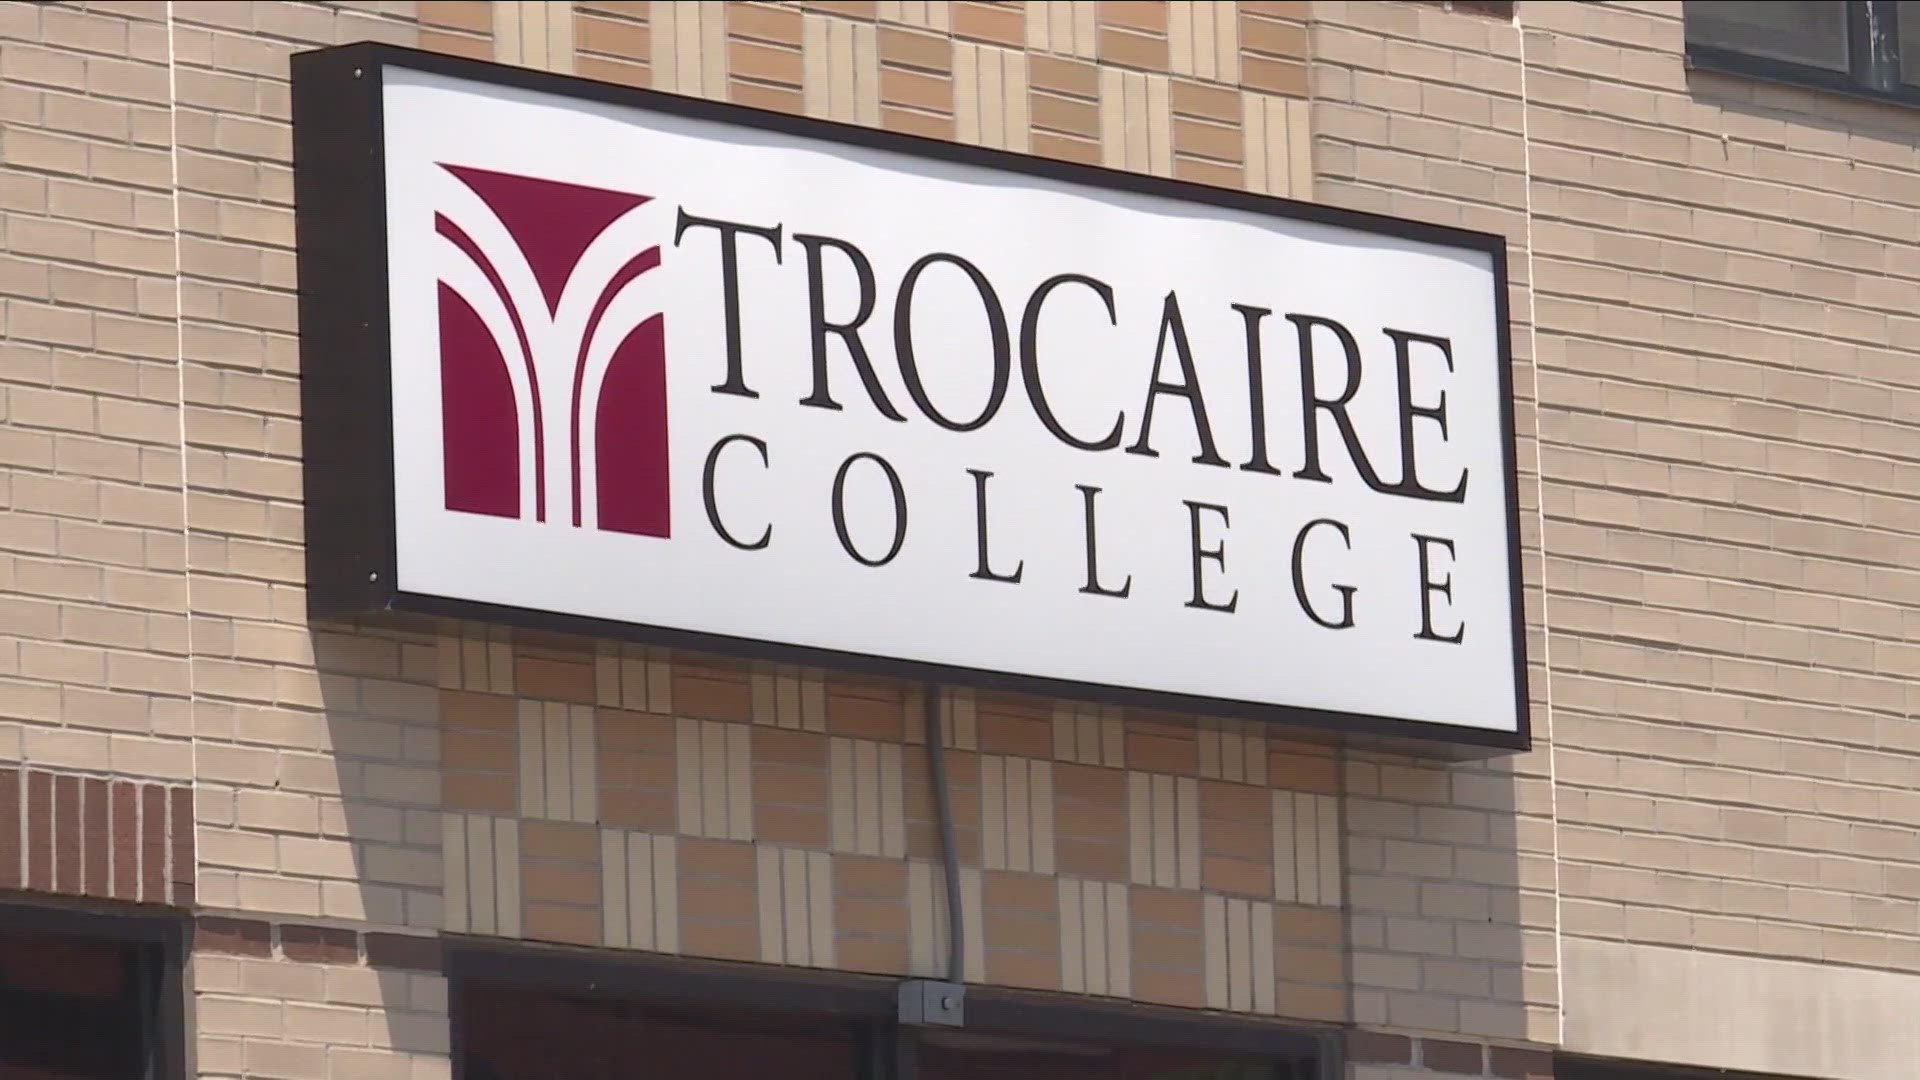 Trocaire College has pulled out of a deal to purchase Medaille University.